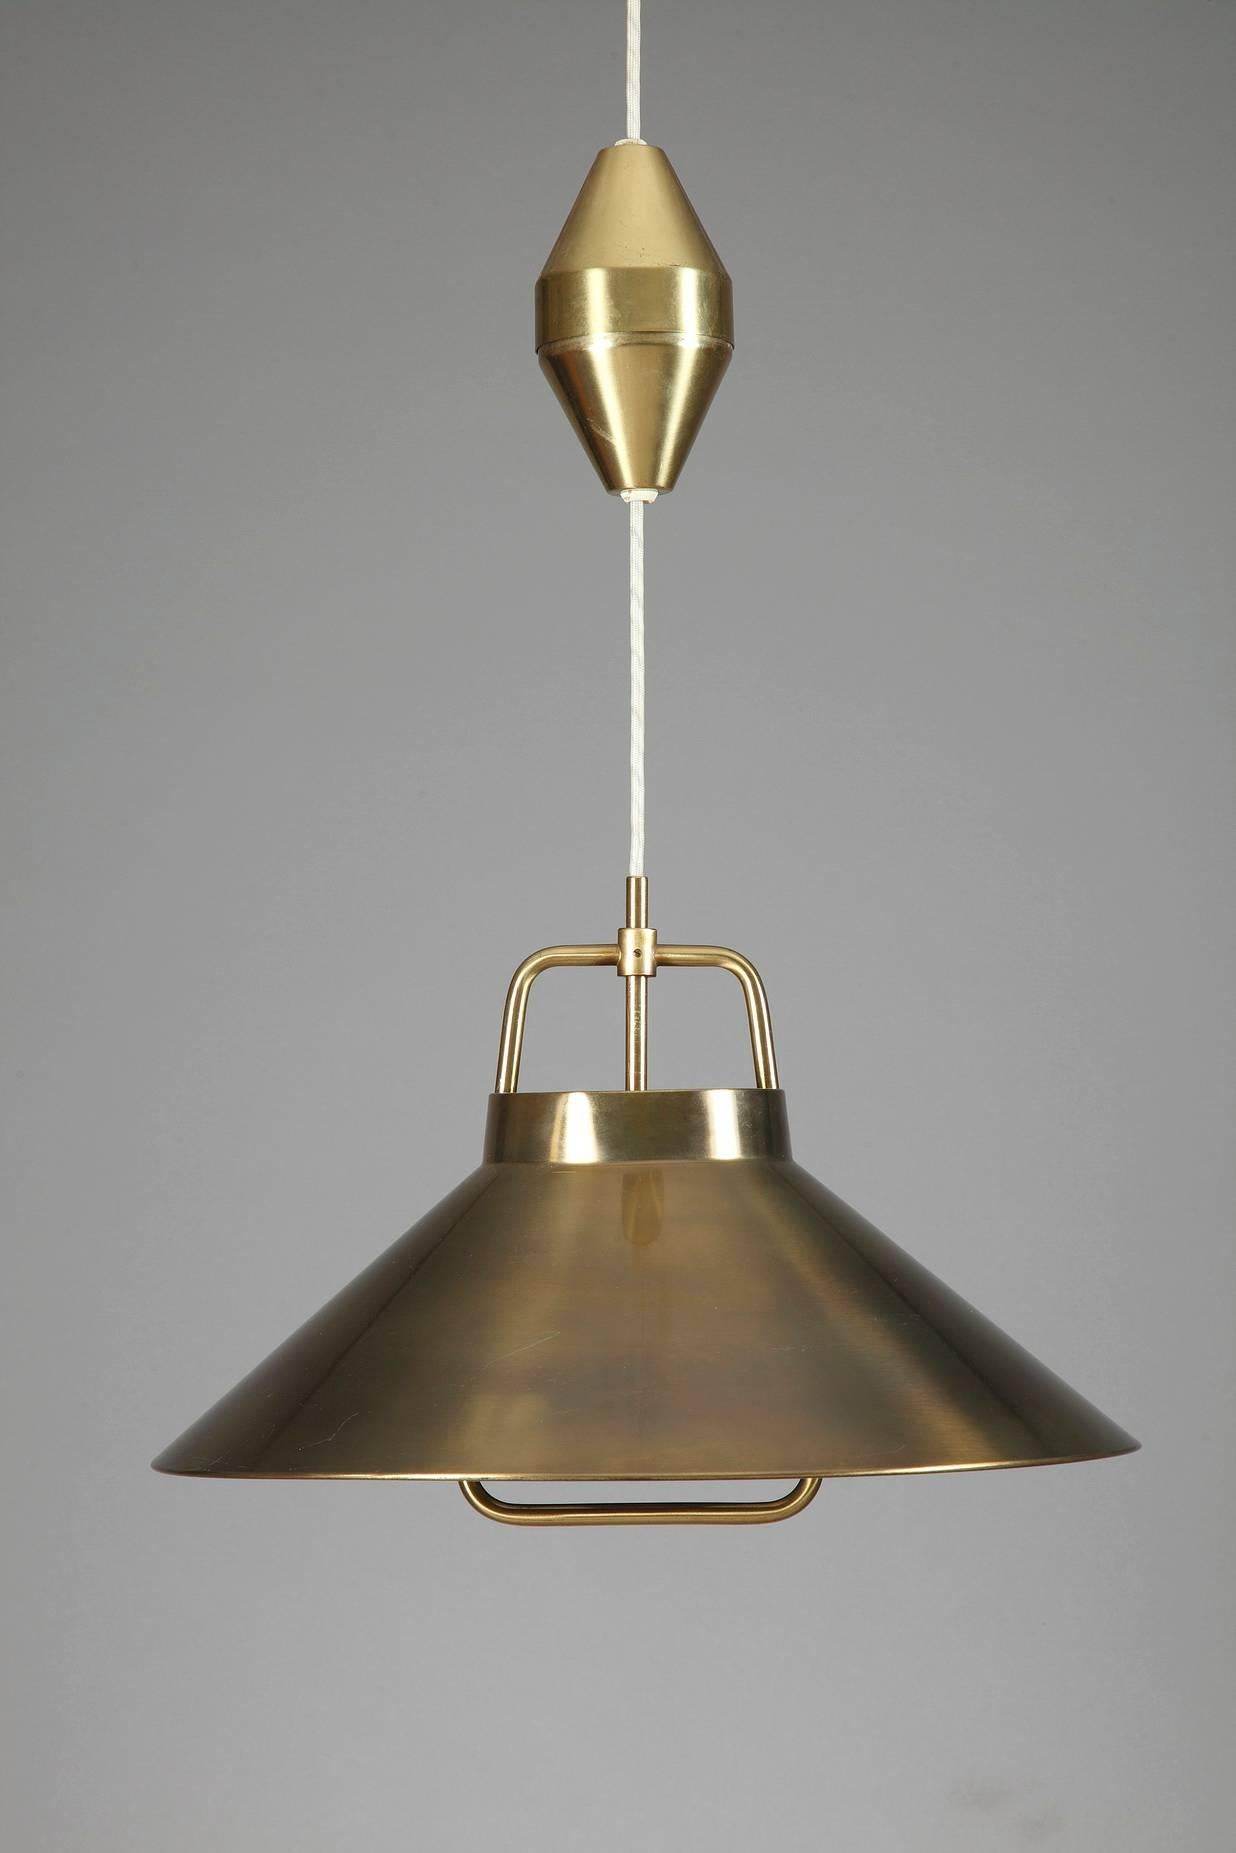 A brass pendant with adjustable height mechanism and brass canopy by Frits Schlegel. Model P 295. Manufactured by Lyfa. 

circa 1960
Dimension: L 44cm, P 44cm, H 35cm.